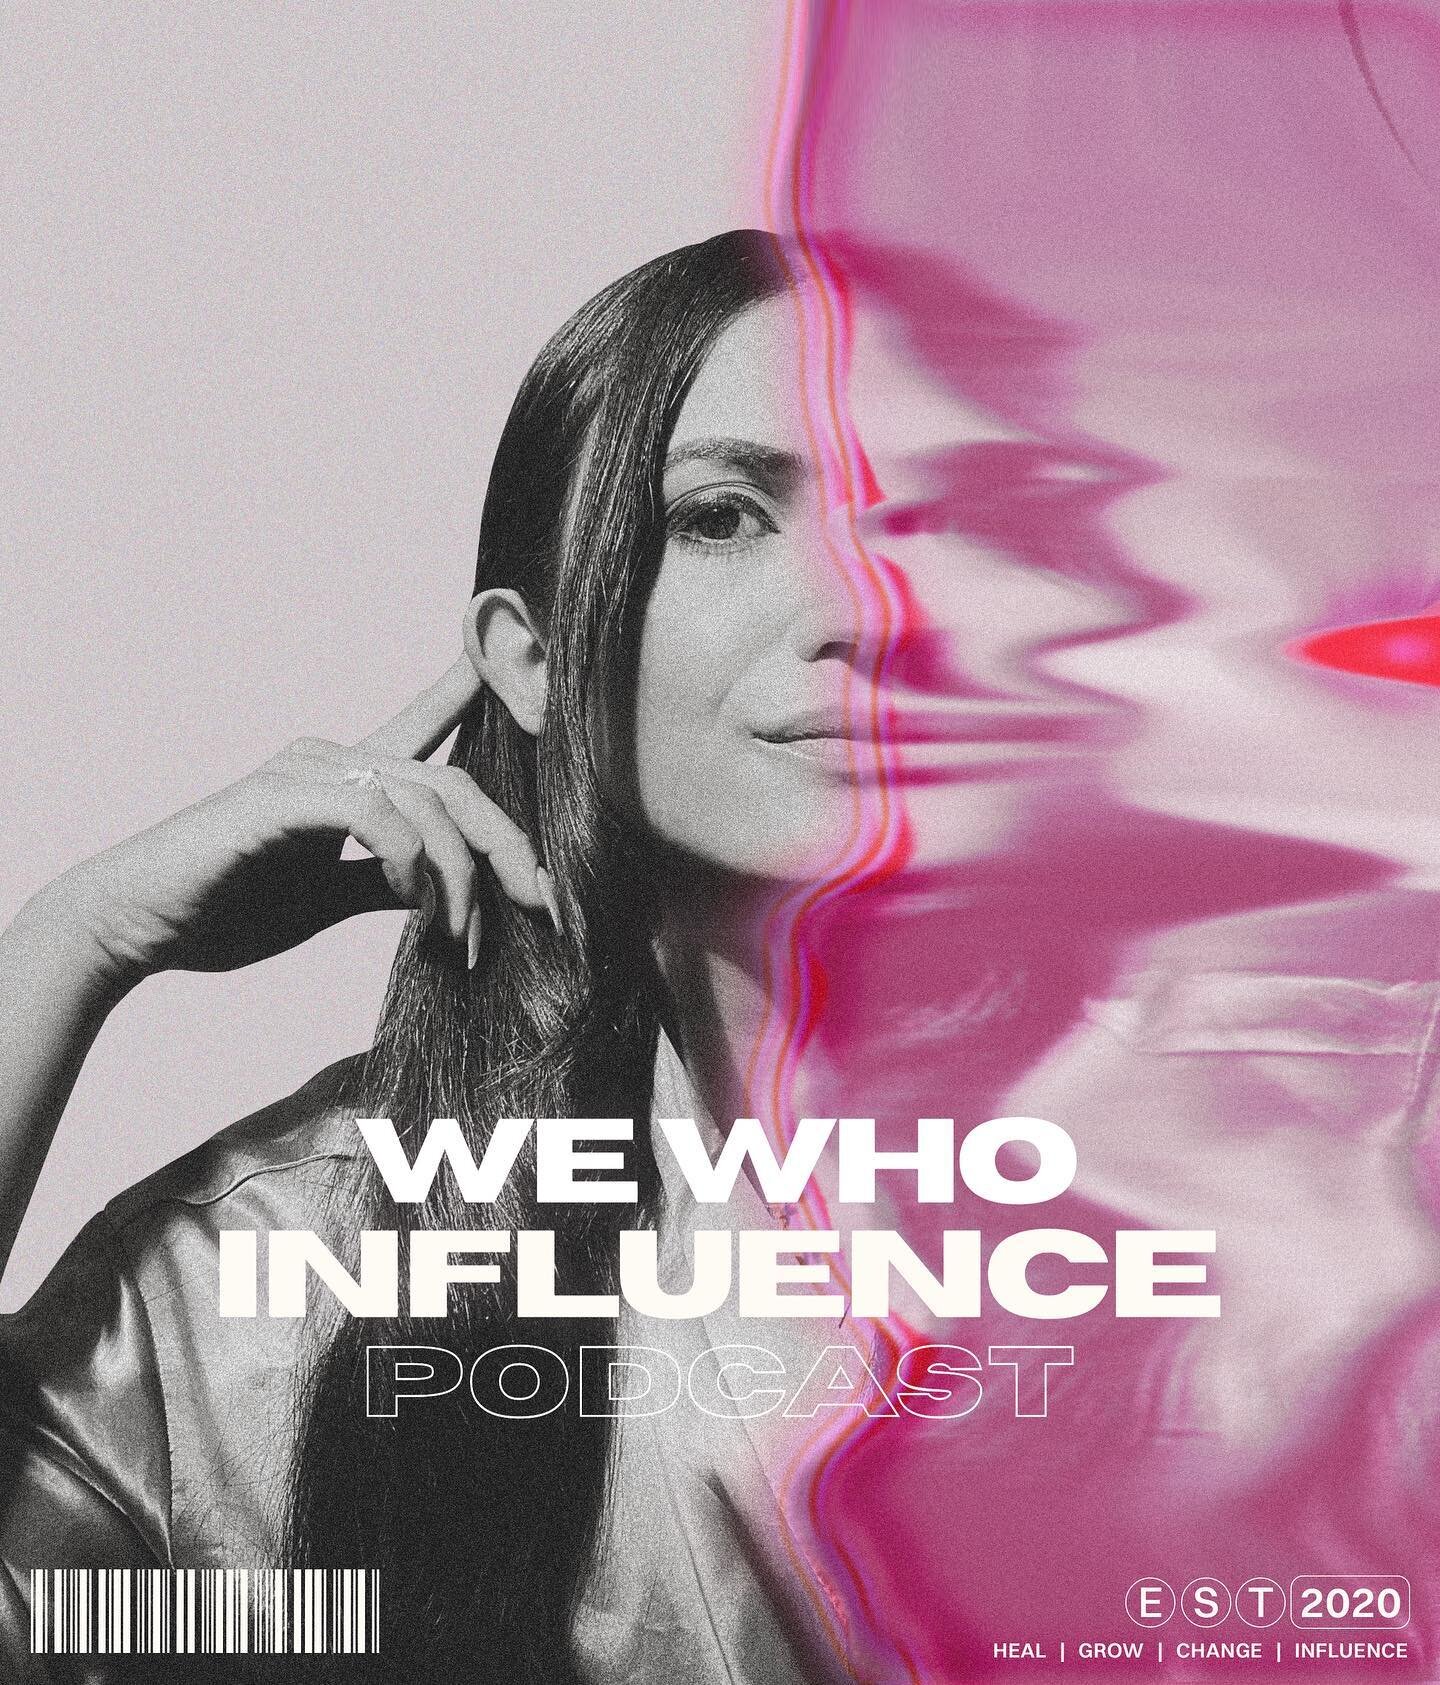 WE WHO INFLUENCE PODCAST 
 💅🏼 coming soon 👀
Share + spread the word! 
Please and thank you ✨